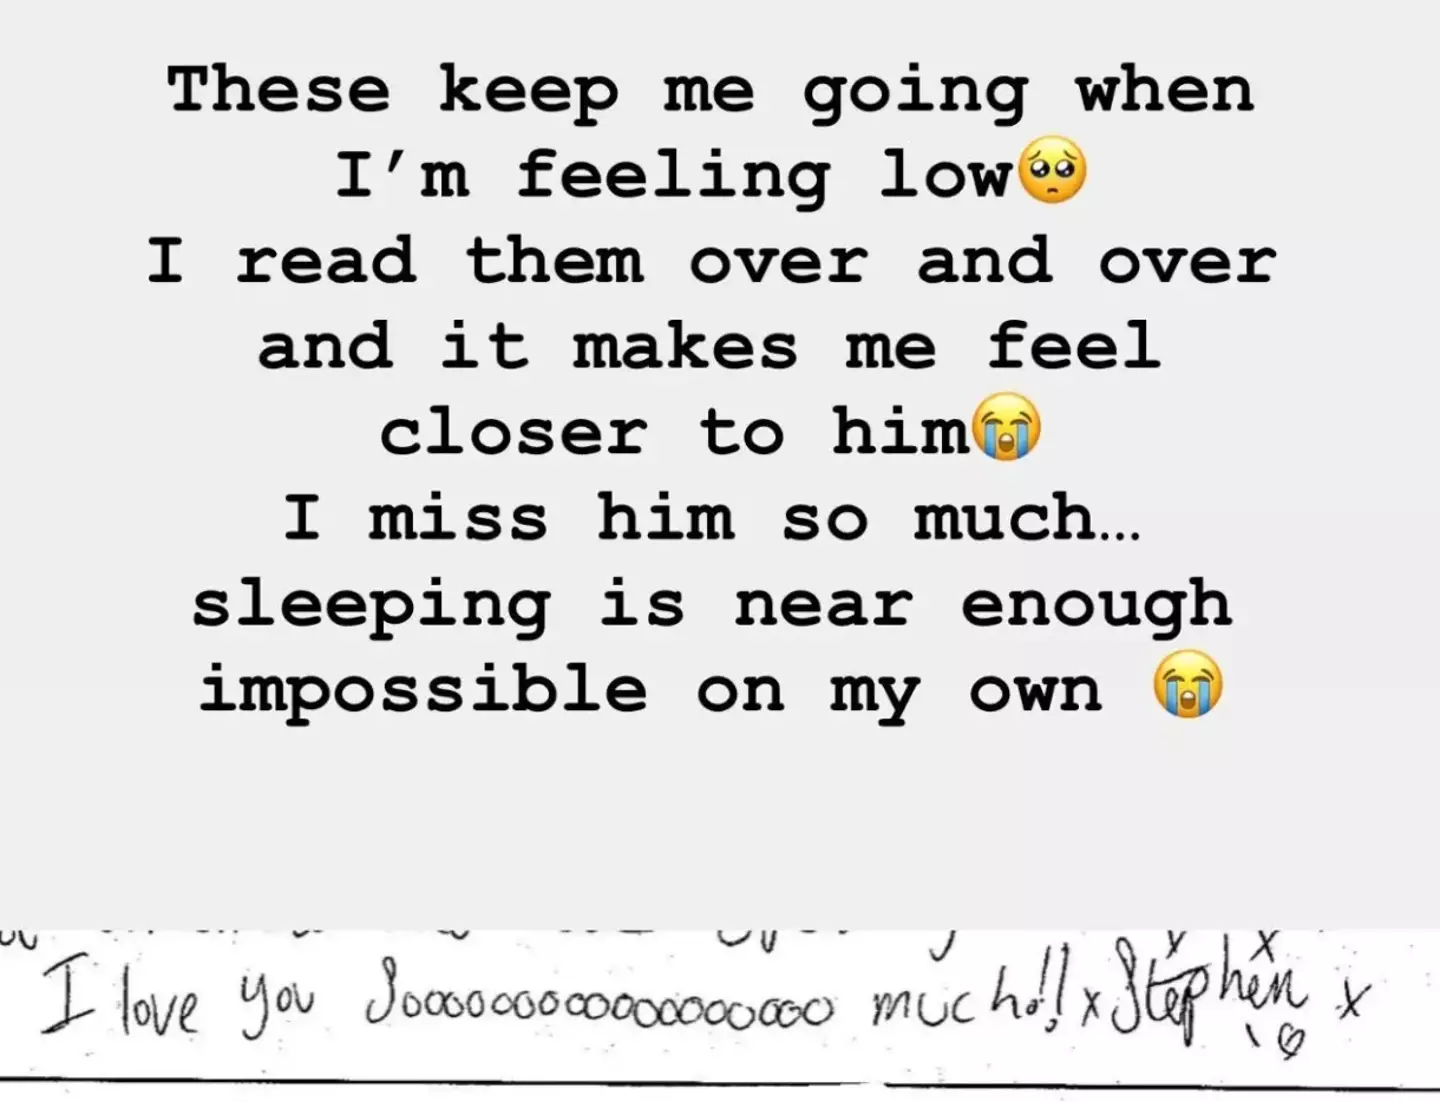 Smith shared the letter on her Instagram story.